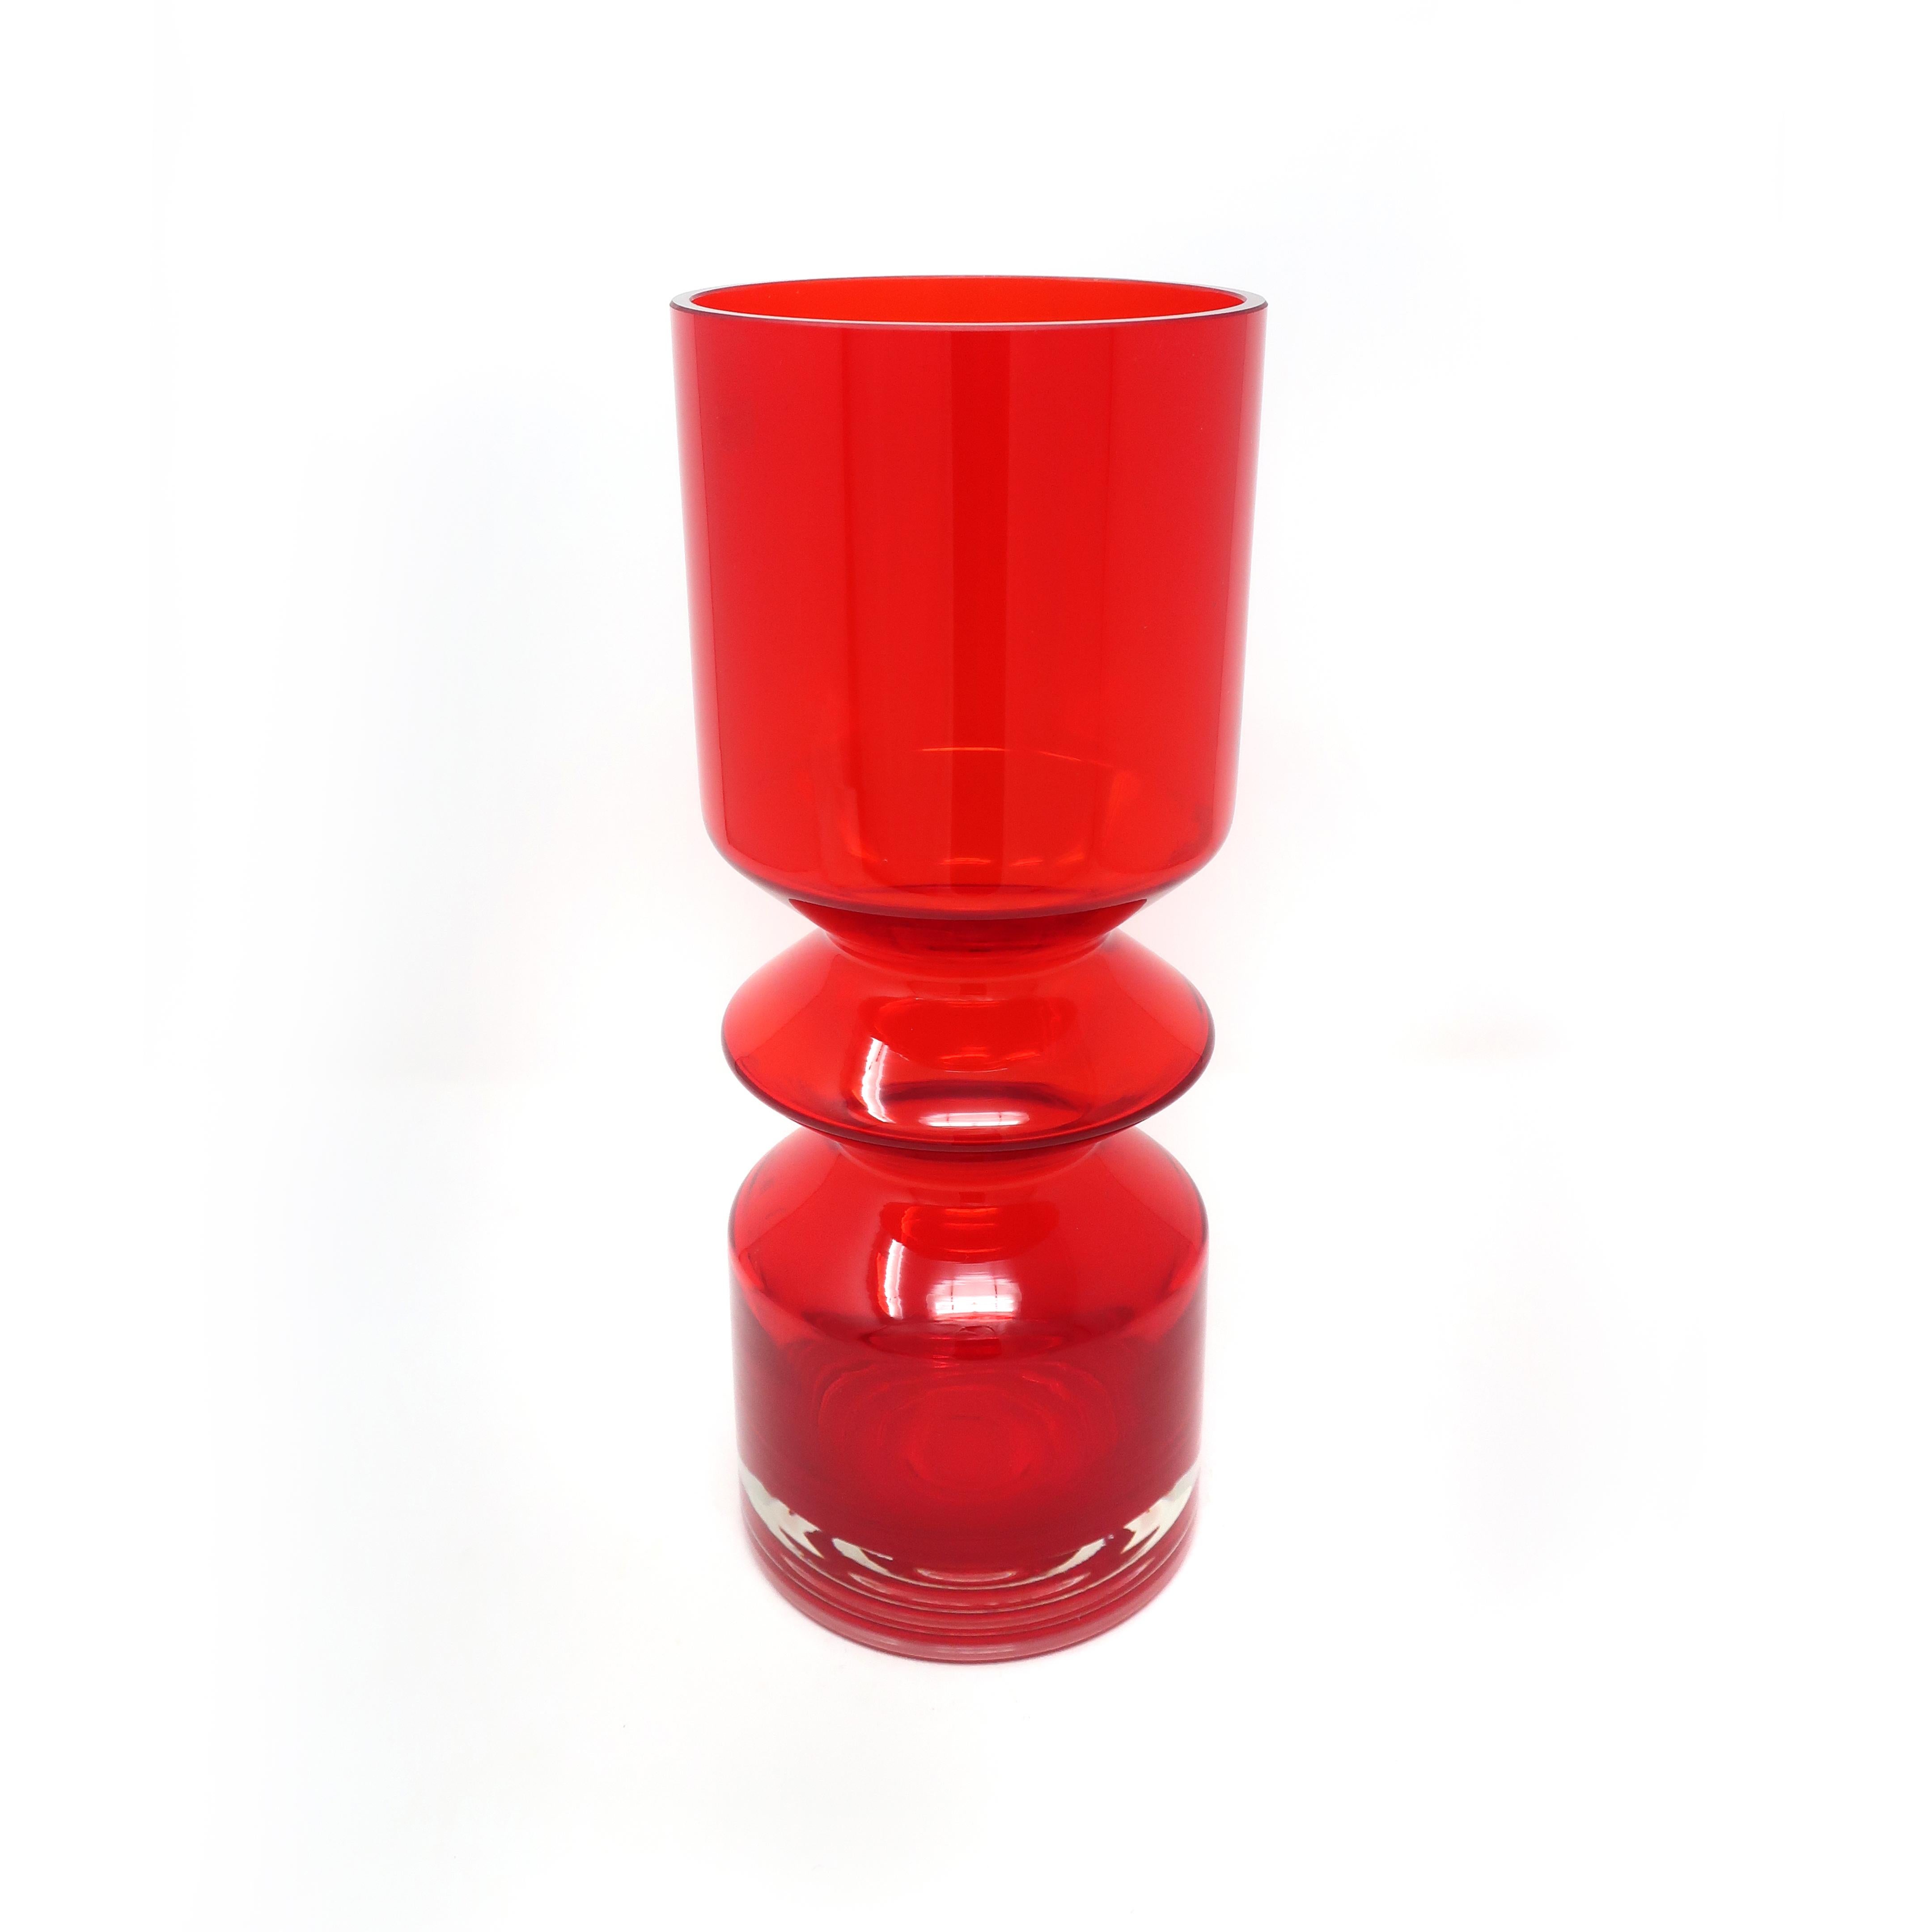 A dazziling large red Finish modernist blown glass vase by Tamara Aladin for Riihimaen Lasi Oy (also referred to as Riihimaki) in a sculptural cylindrical form. In excellent condition with faint remnants of original sticker label.

Measures: 4.5”